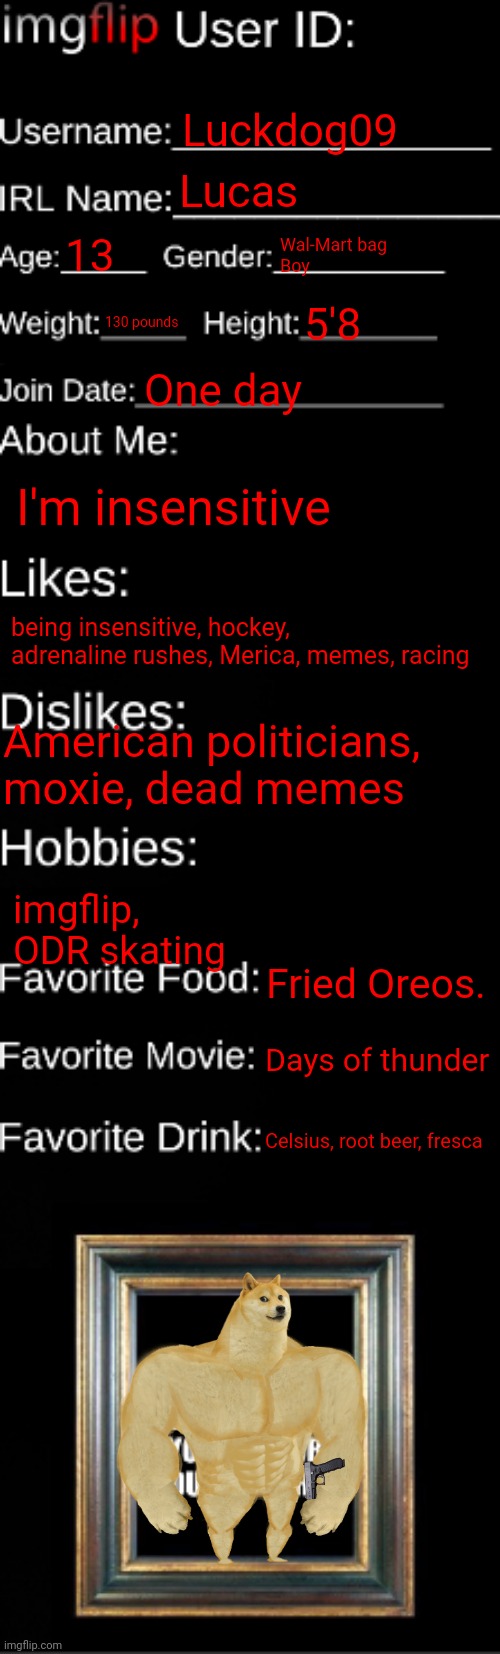 imgflip ID Card | Luckdog09; Lucas; 13; Wal-Mart bag
Boy; 130 pounds; 5'8; One day; I'm insensitive; being insensitive, hockey, adrenaline rushes, Merica, memes, racing; American politicians, moxie, dead memes; imgflip, 
ODR skating; Fried Oreos. Days of thunder; Celsius, root beer, fresca | image tagged in imgflip id card | made w/ Imgflip meme maker